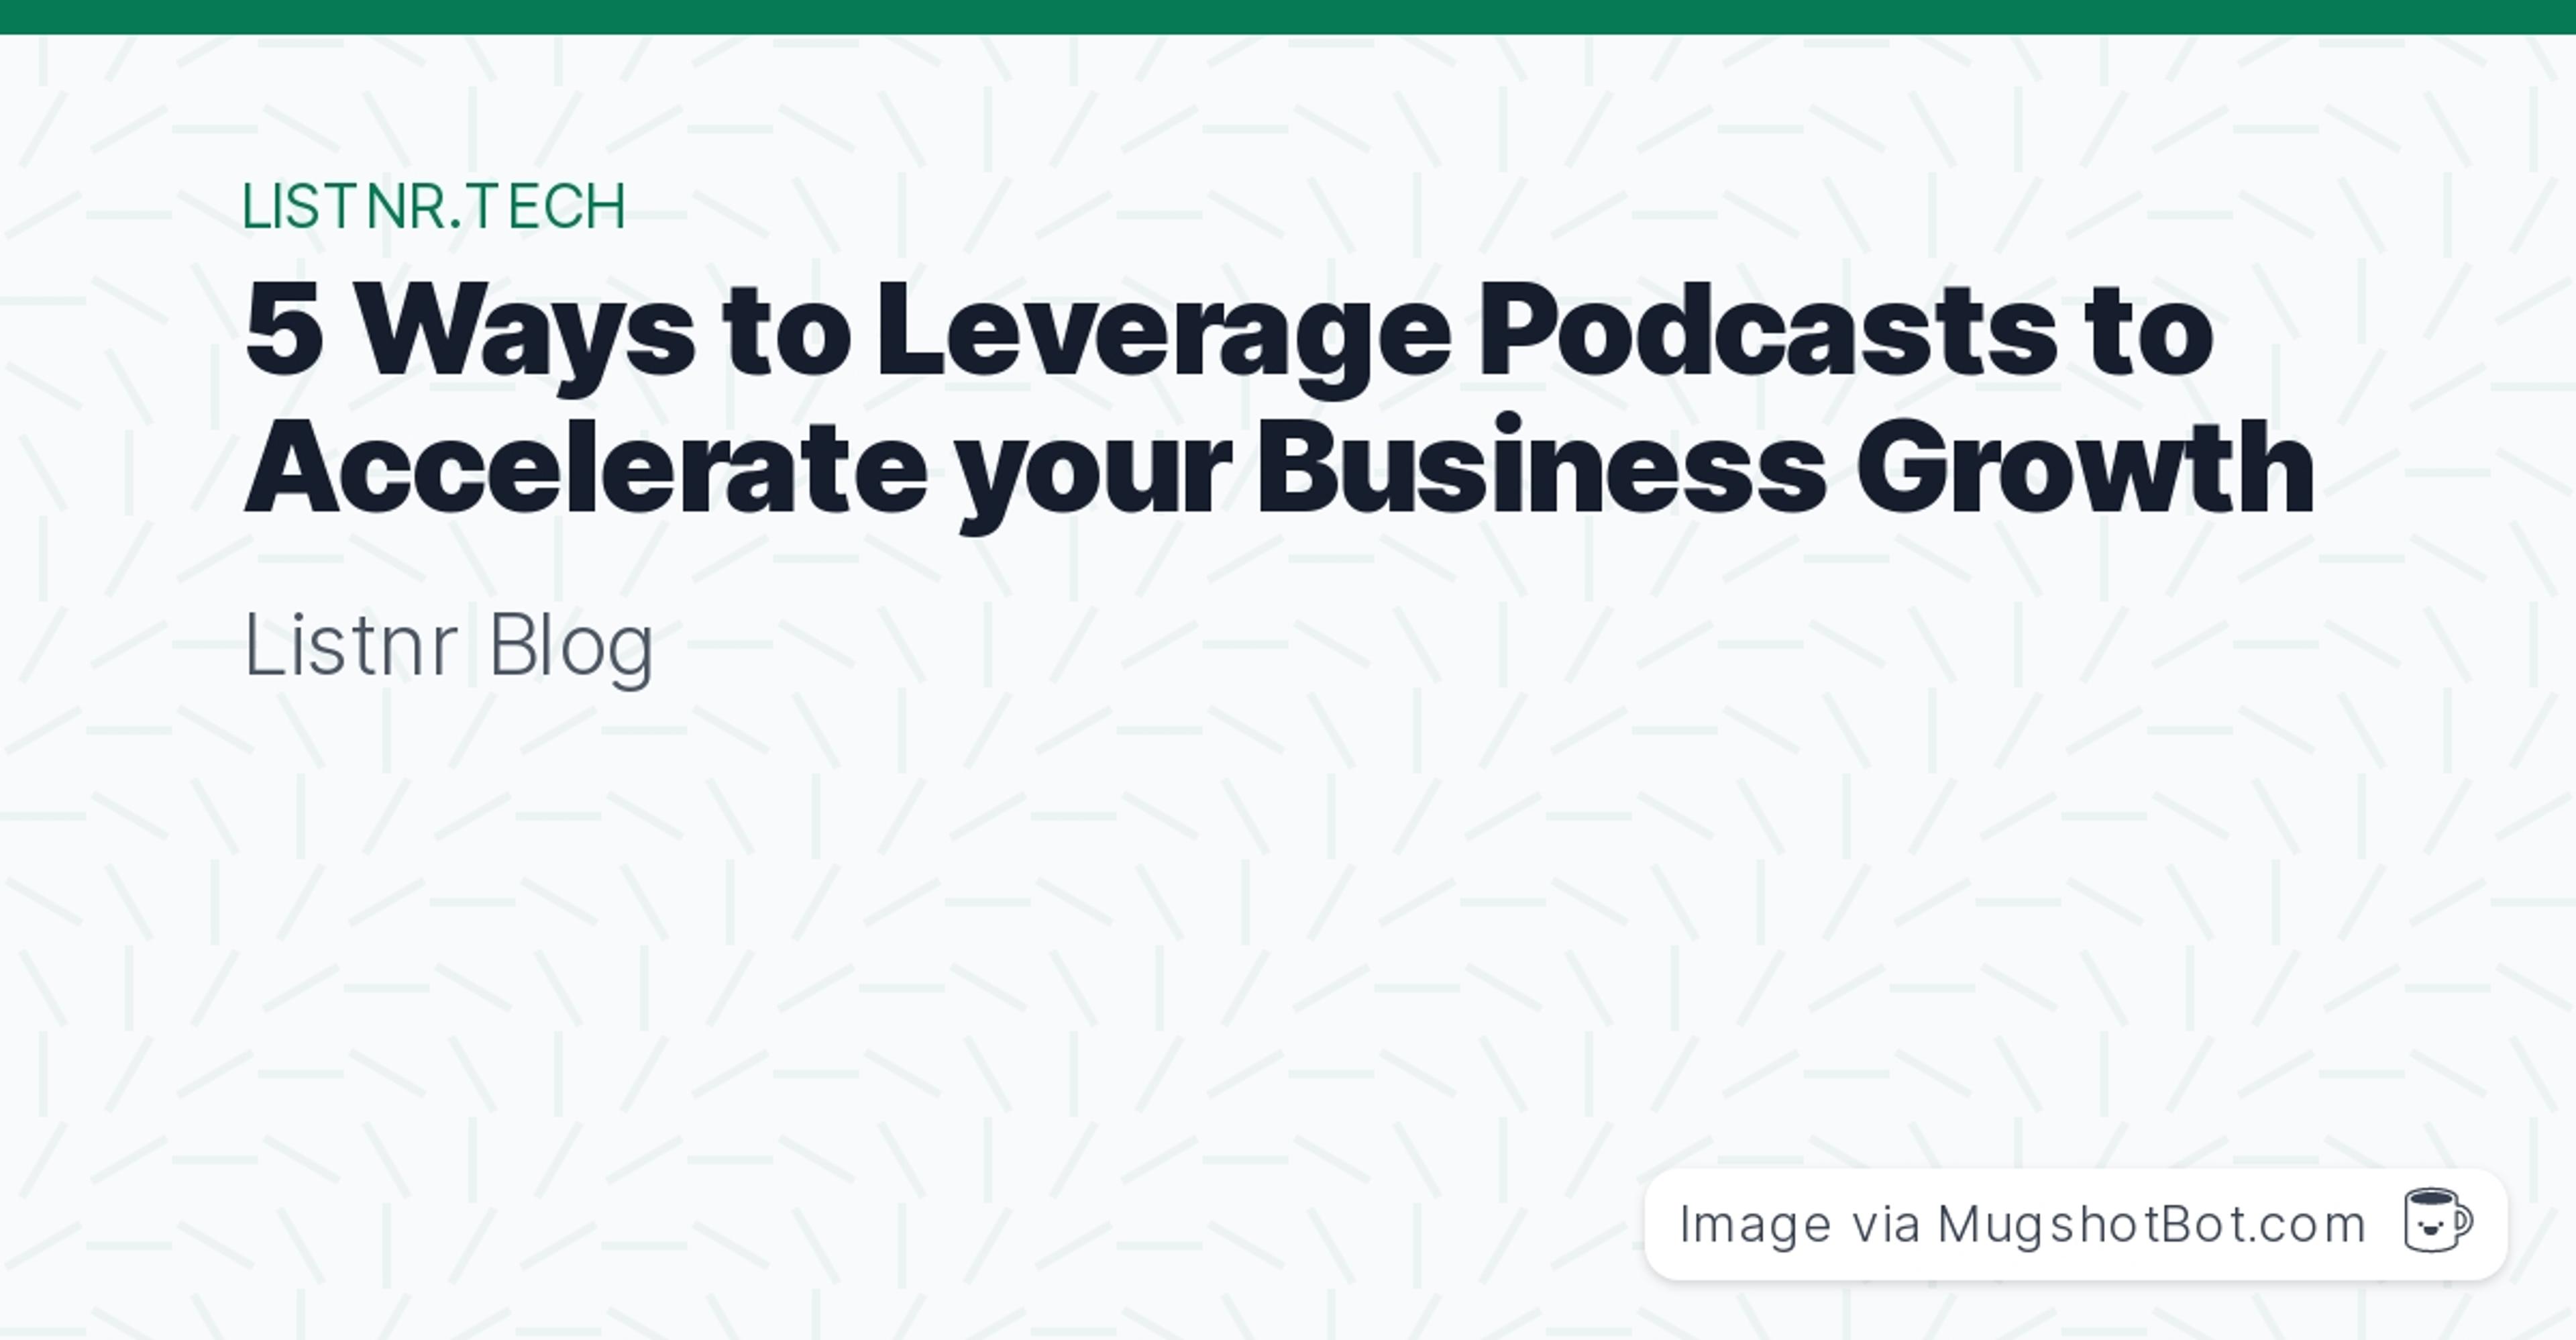 5 Ways to Leverage Podcasts to Accelerate your Business Growth